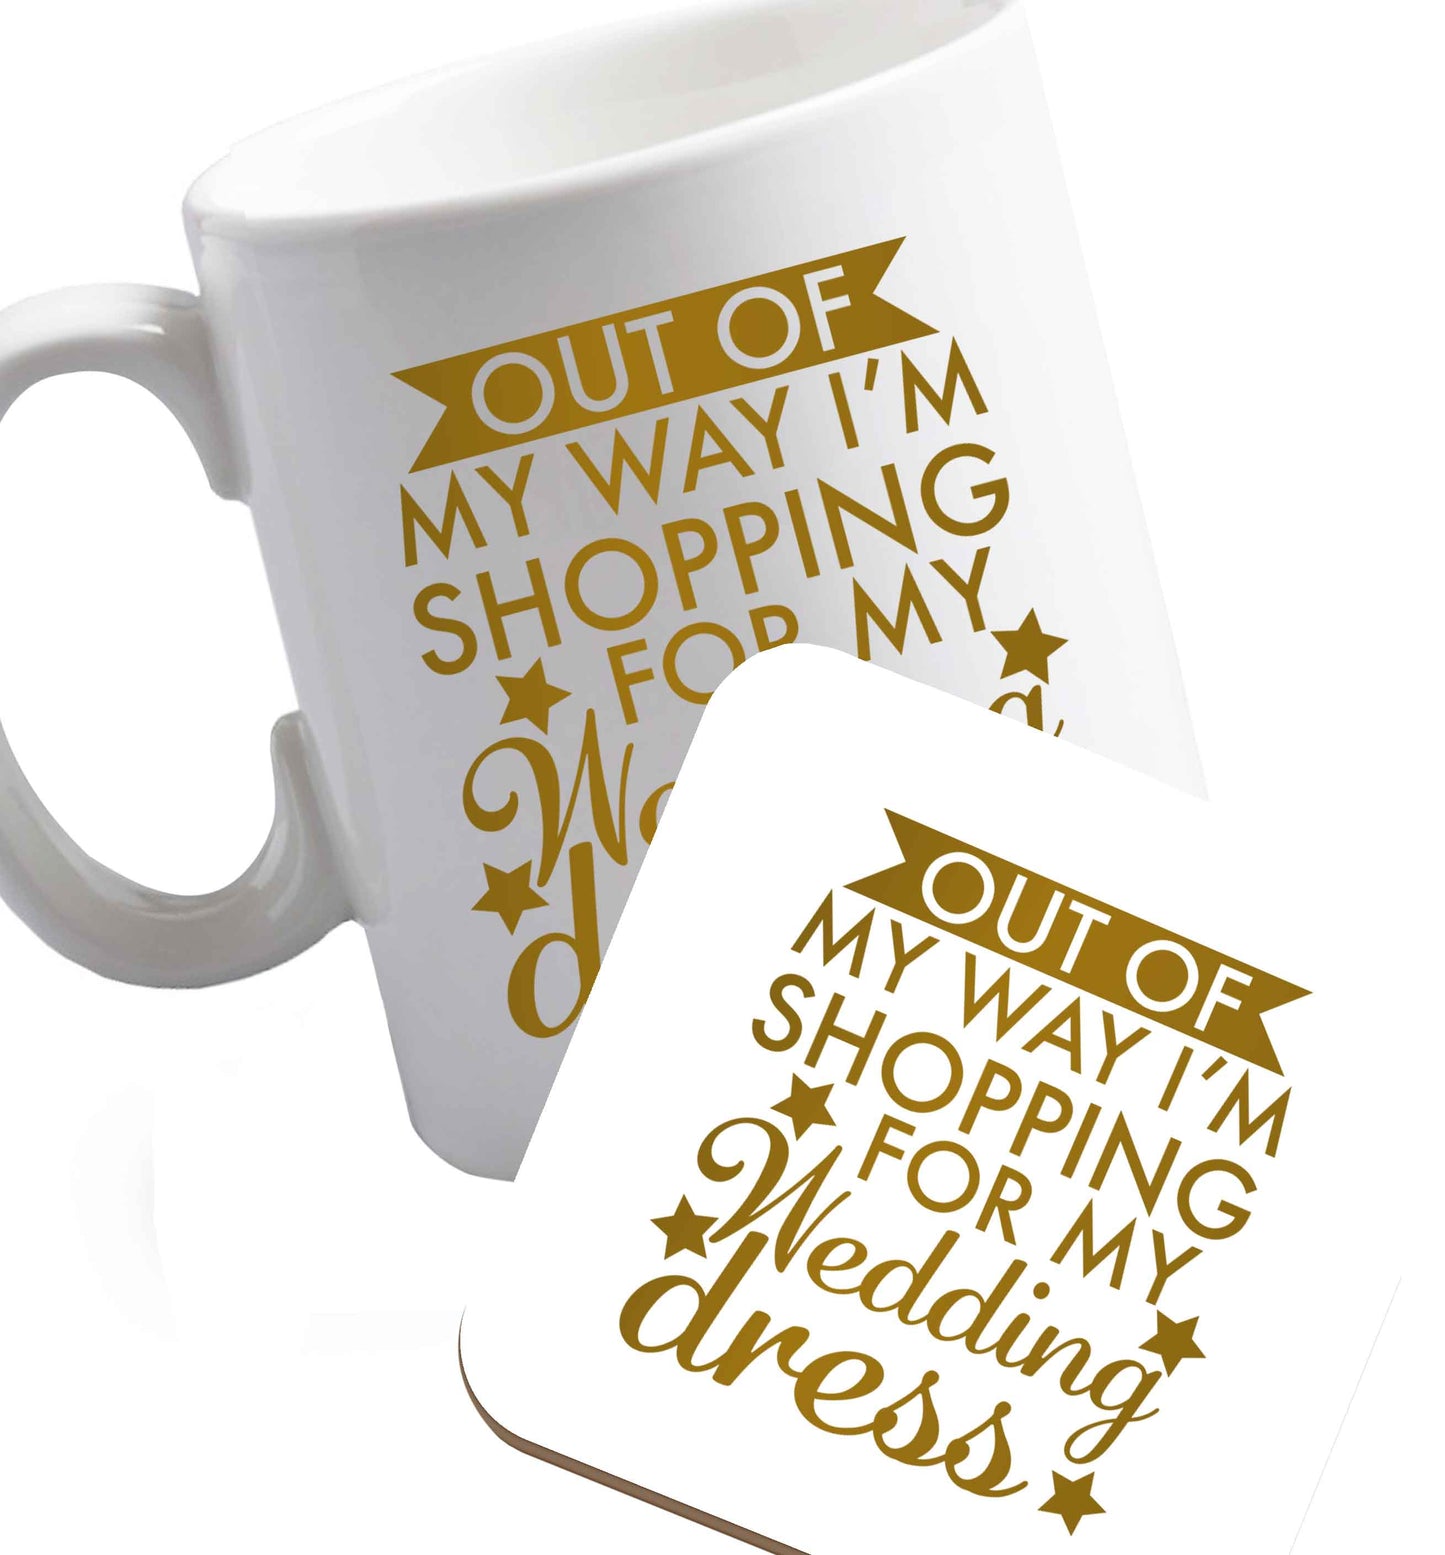 10 oz Out of my way I'm shopping for my wedding dress   ceramic mug and coaster set right handed